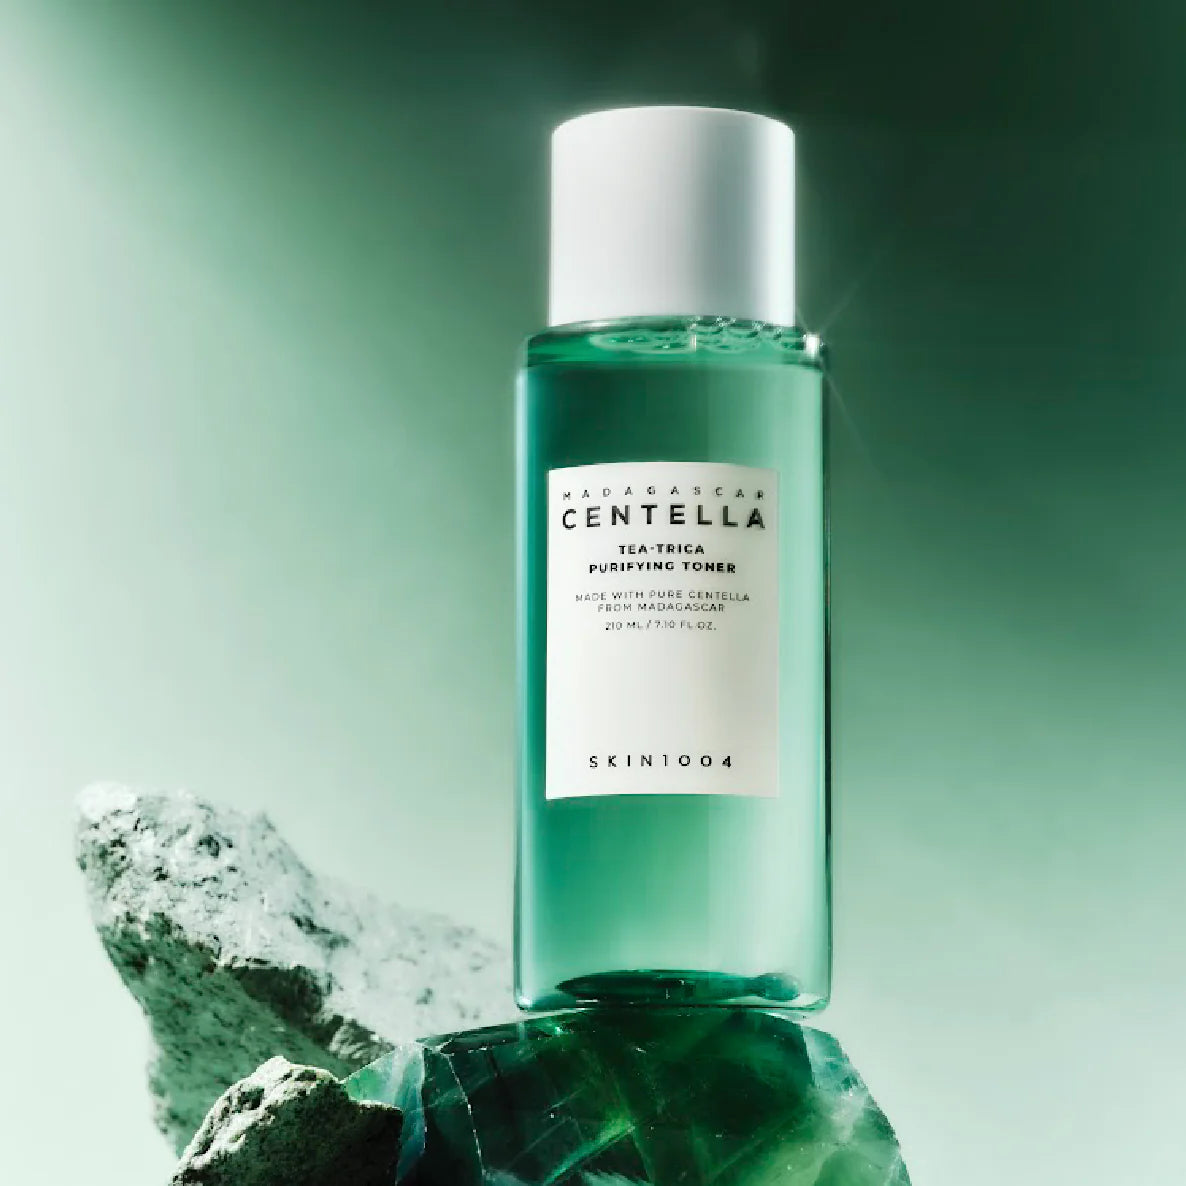 SKIN1004 Madagascar Centella Tea-Trica Purifying Toner 210ml in a green and white bottle.